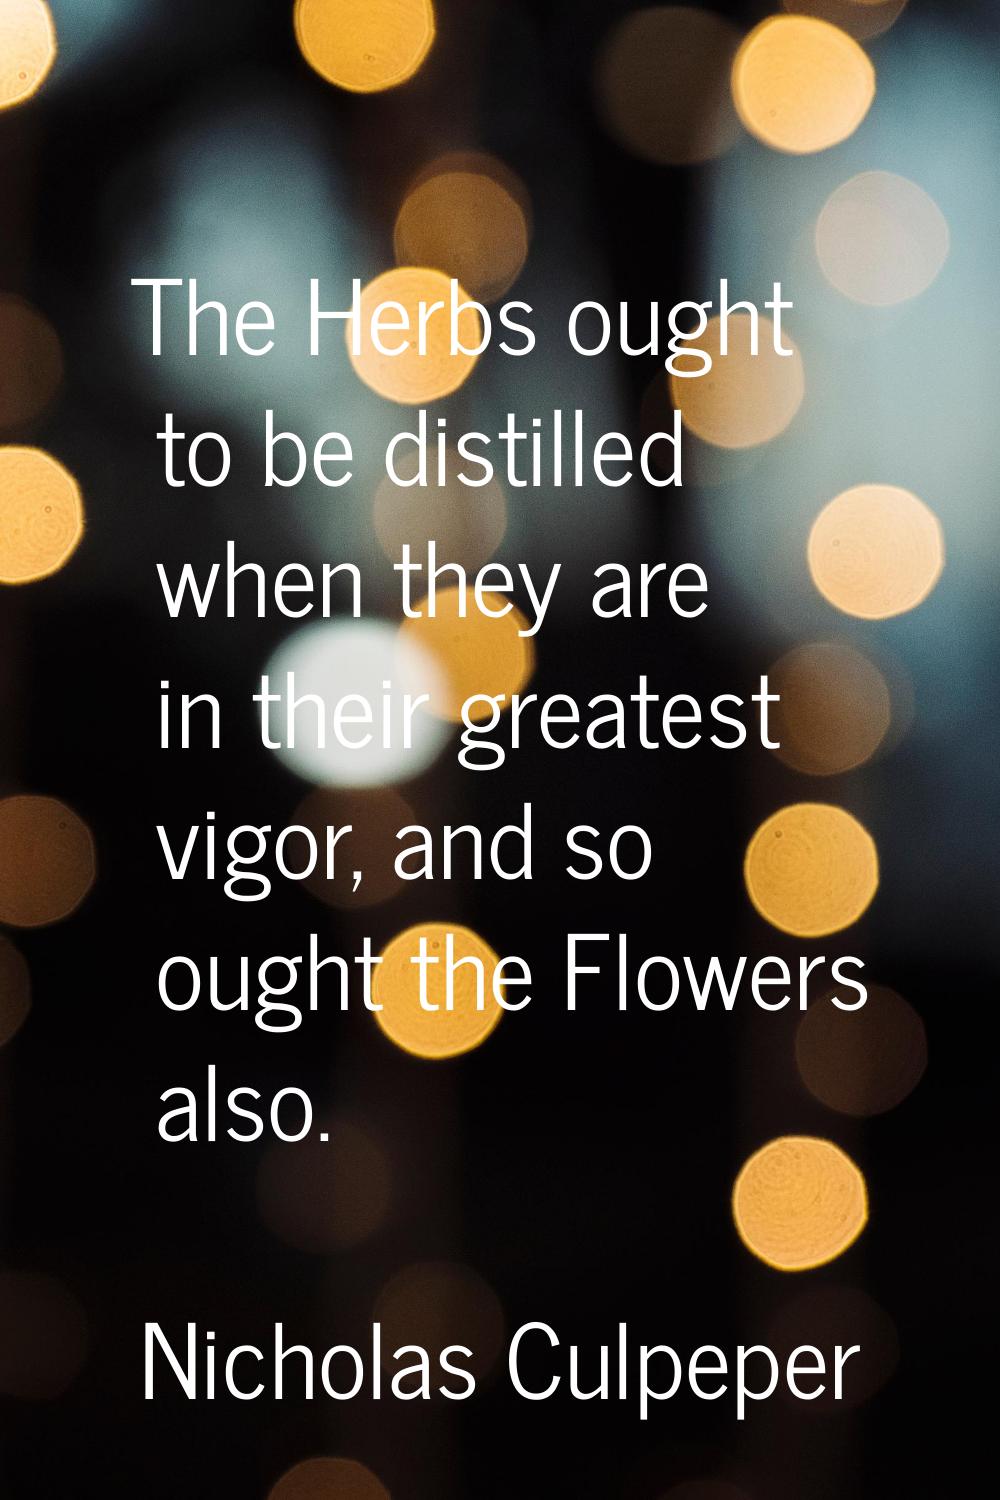 The Herbs ought to be distilled when they are in their greatest vigor, and so ought the Flowers als